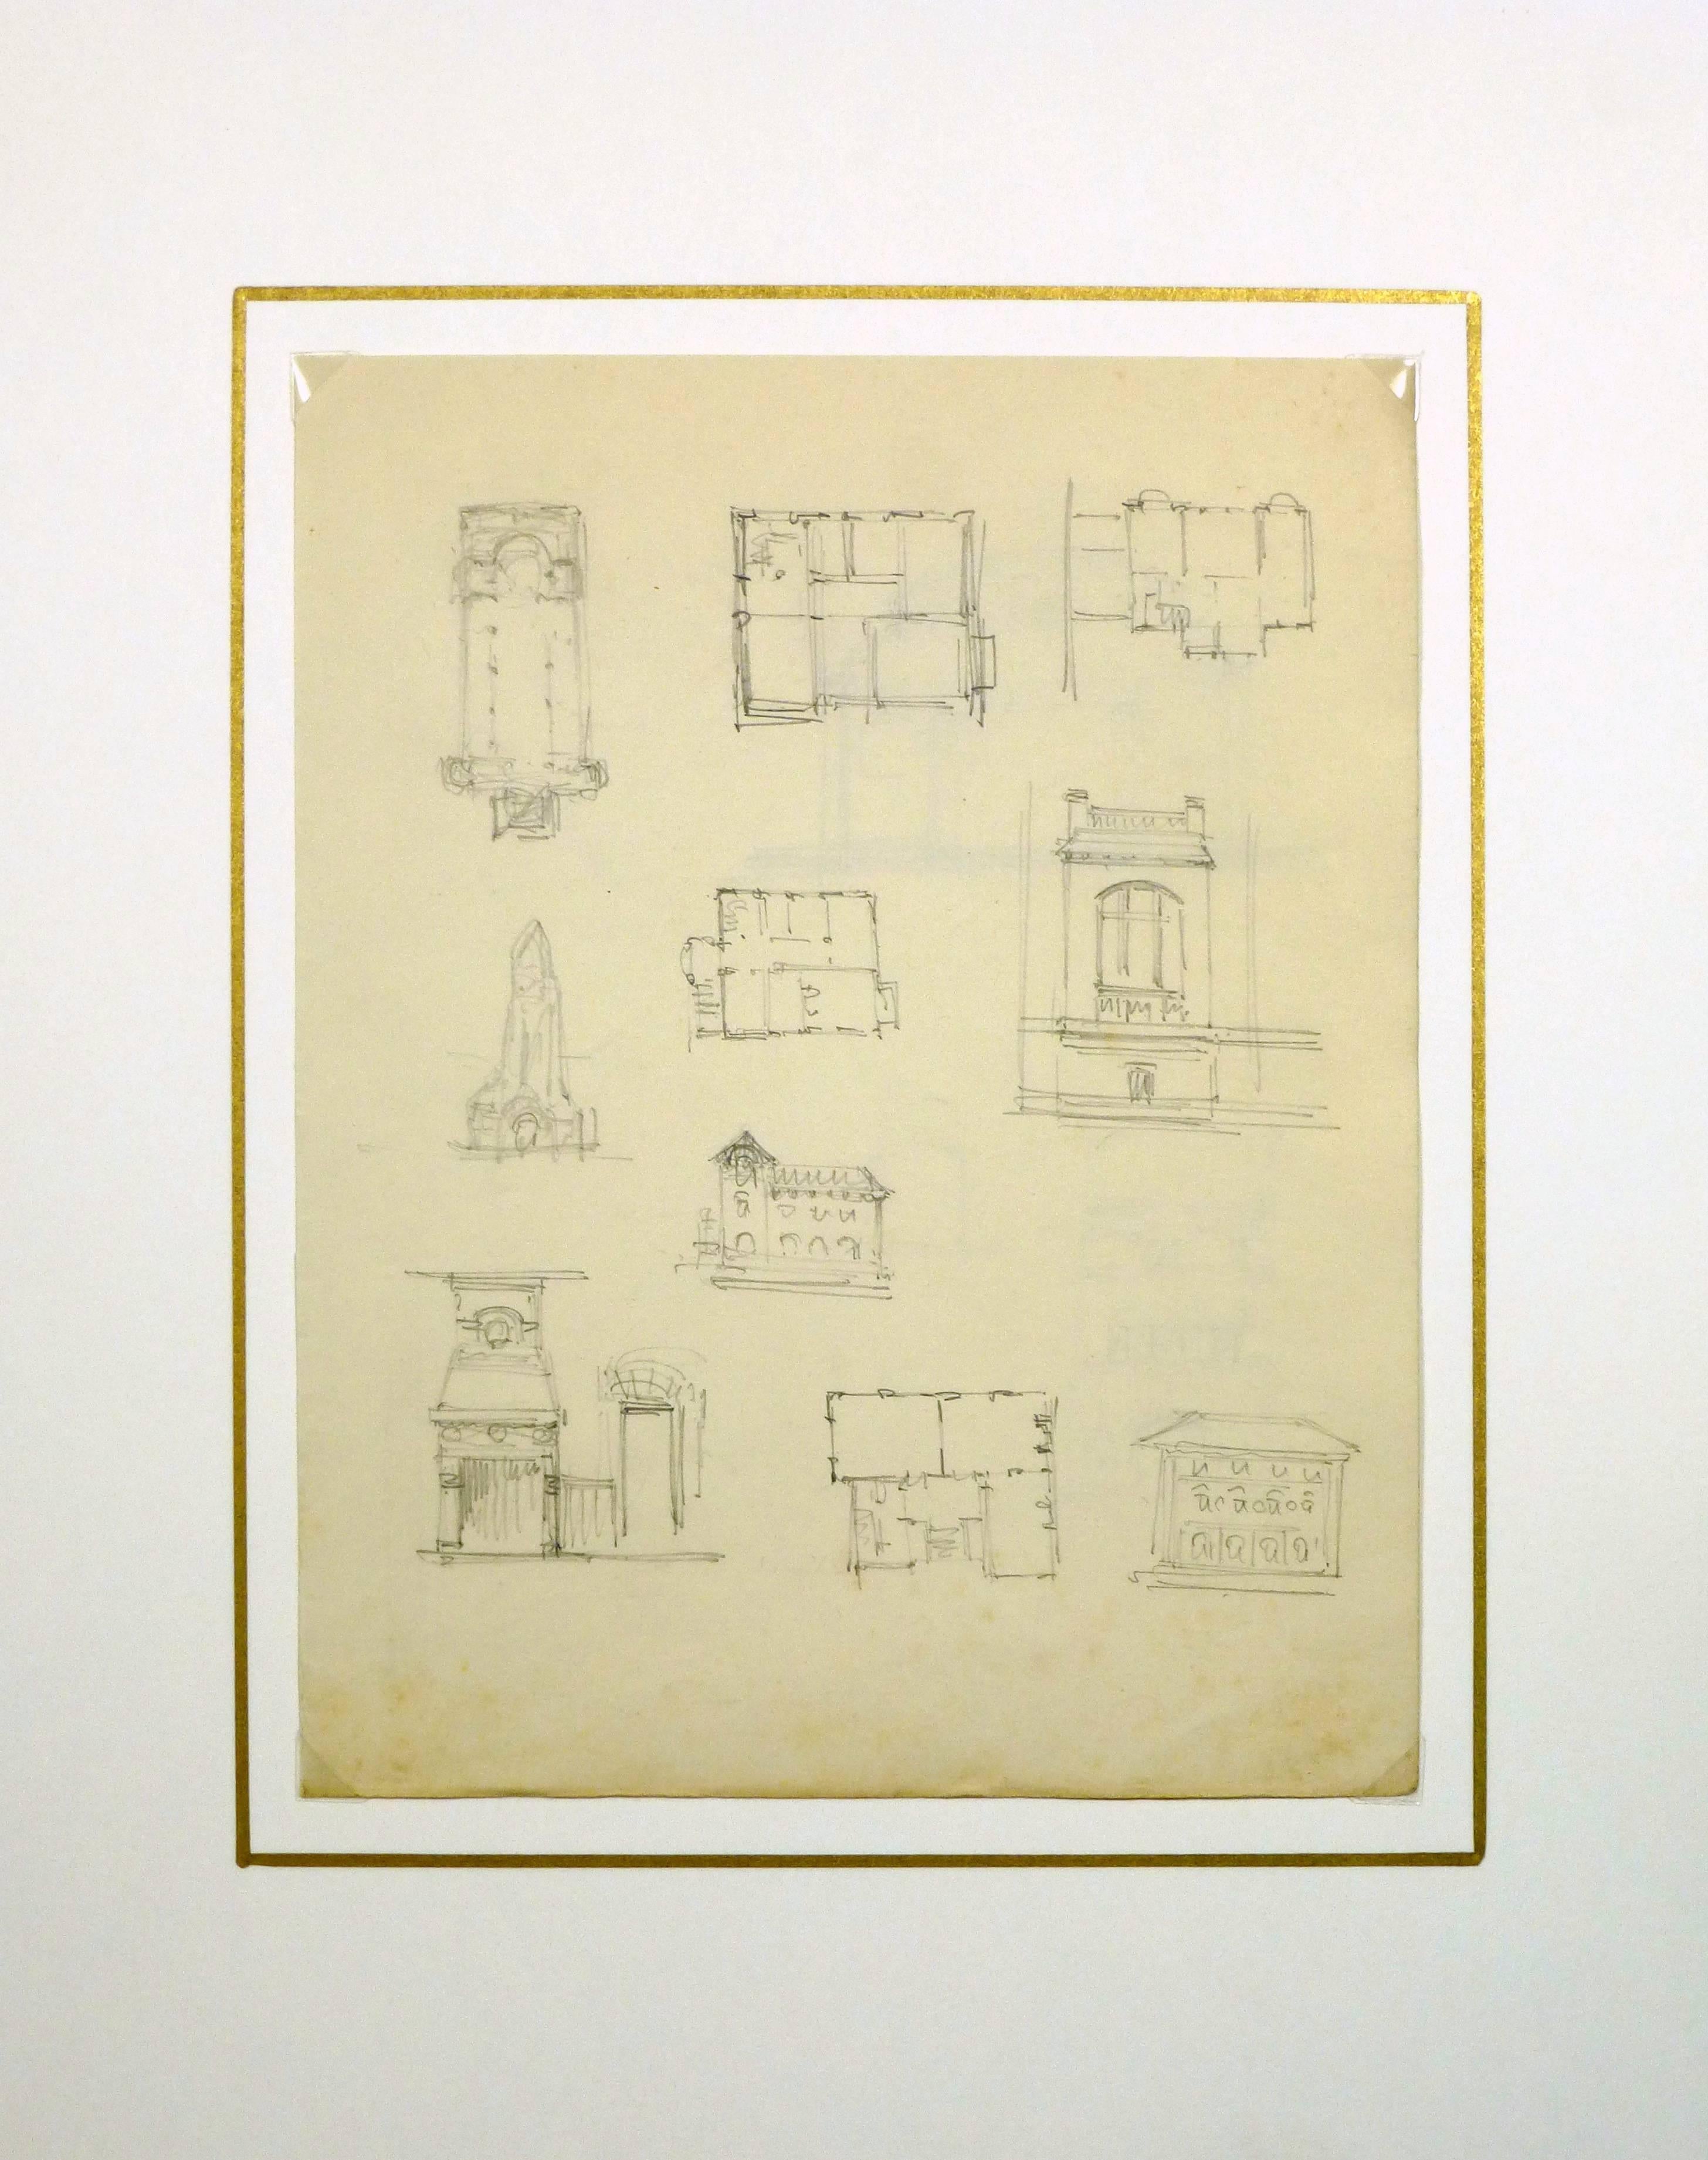 Delightful French pencil sketches of buildings and floor plans, circa 1910. 

Original artwork on paper displayed on a white mat with a gold border. Mat fits a standard-sized frame. Archival plastic sleeve and Certificate of Authenticity included.